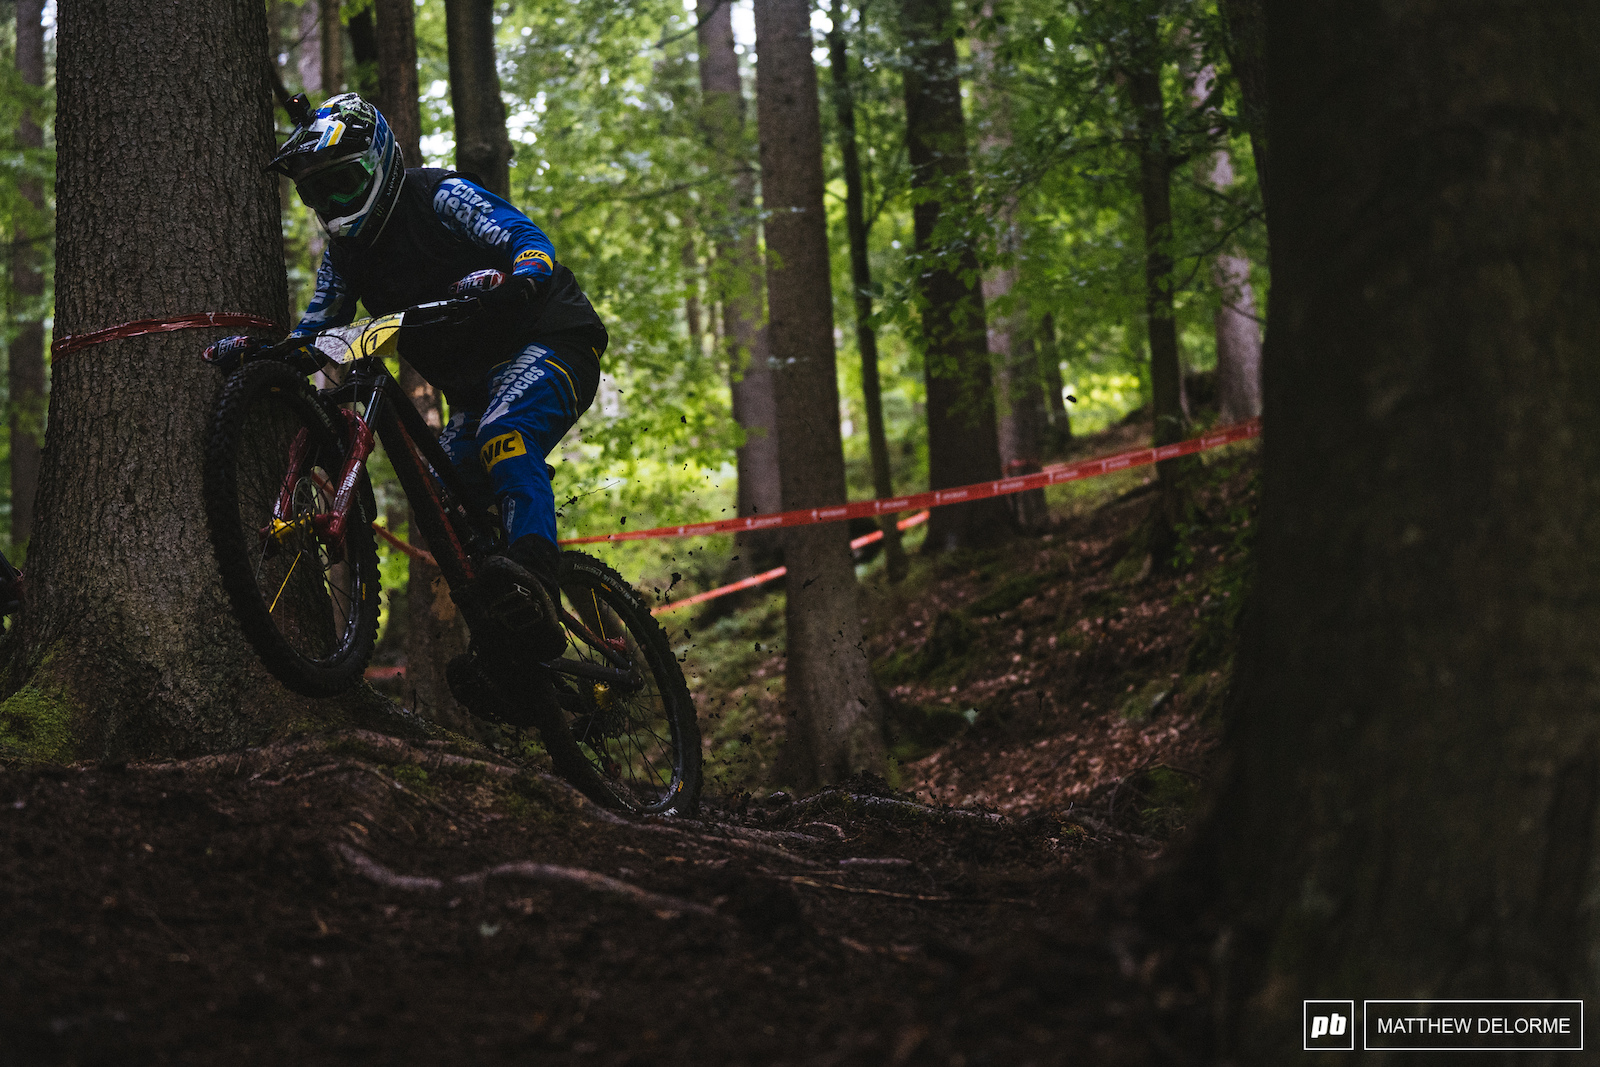 Sam Hill is still the man to beat. Or is he 